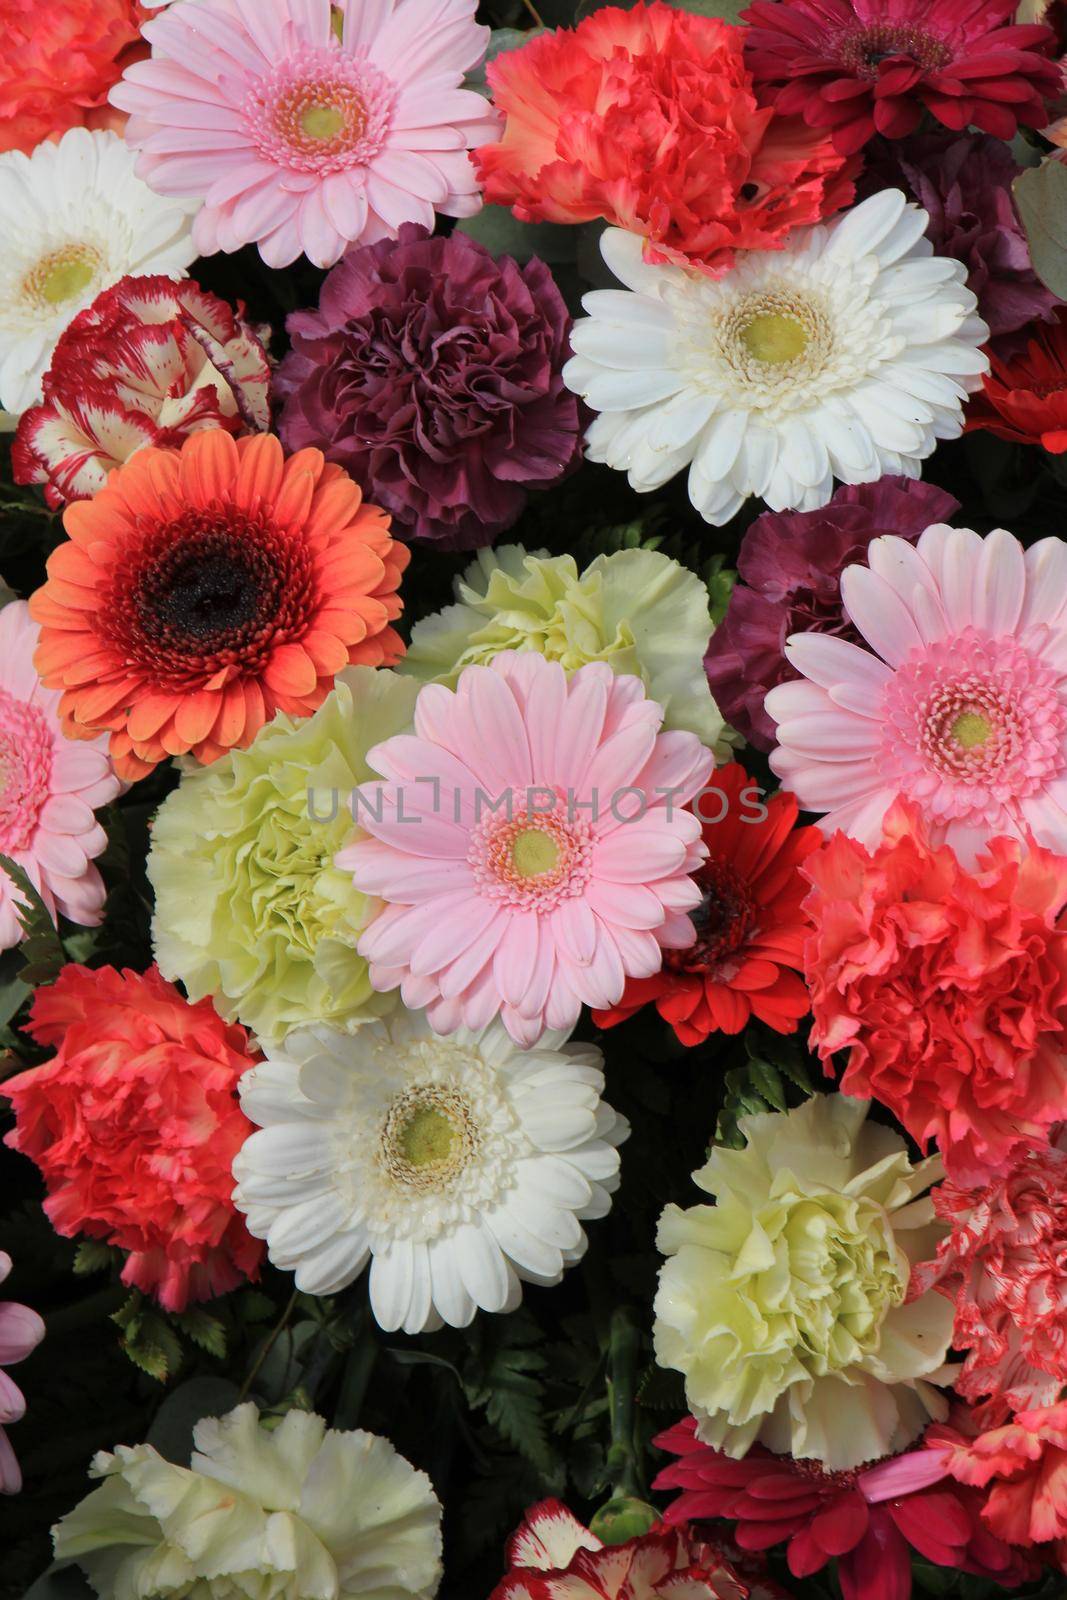 Mixed flower arrangement: various gerbers in different colors for a wedding